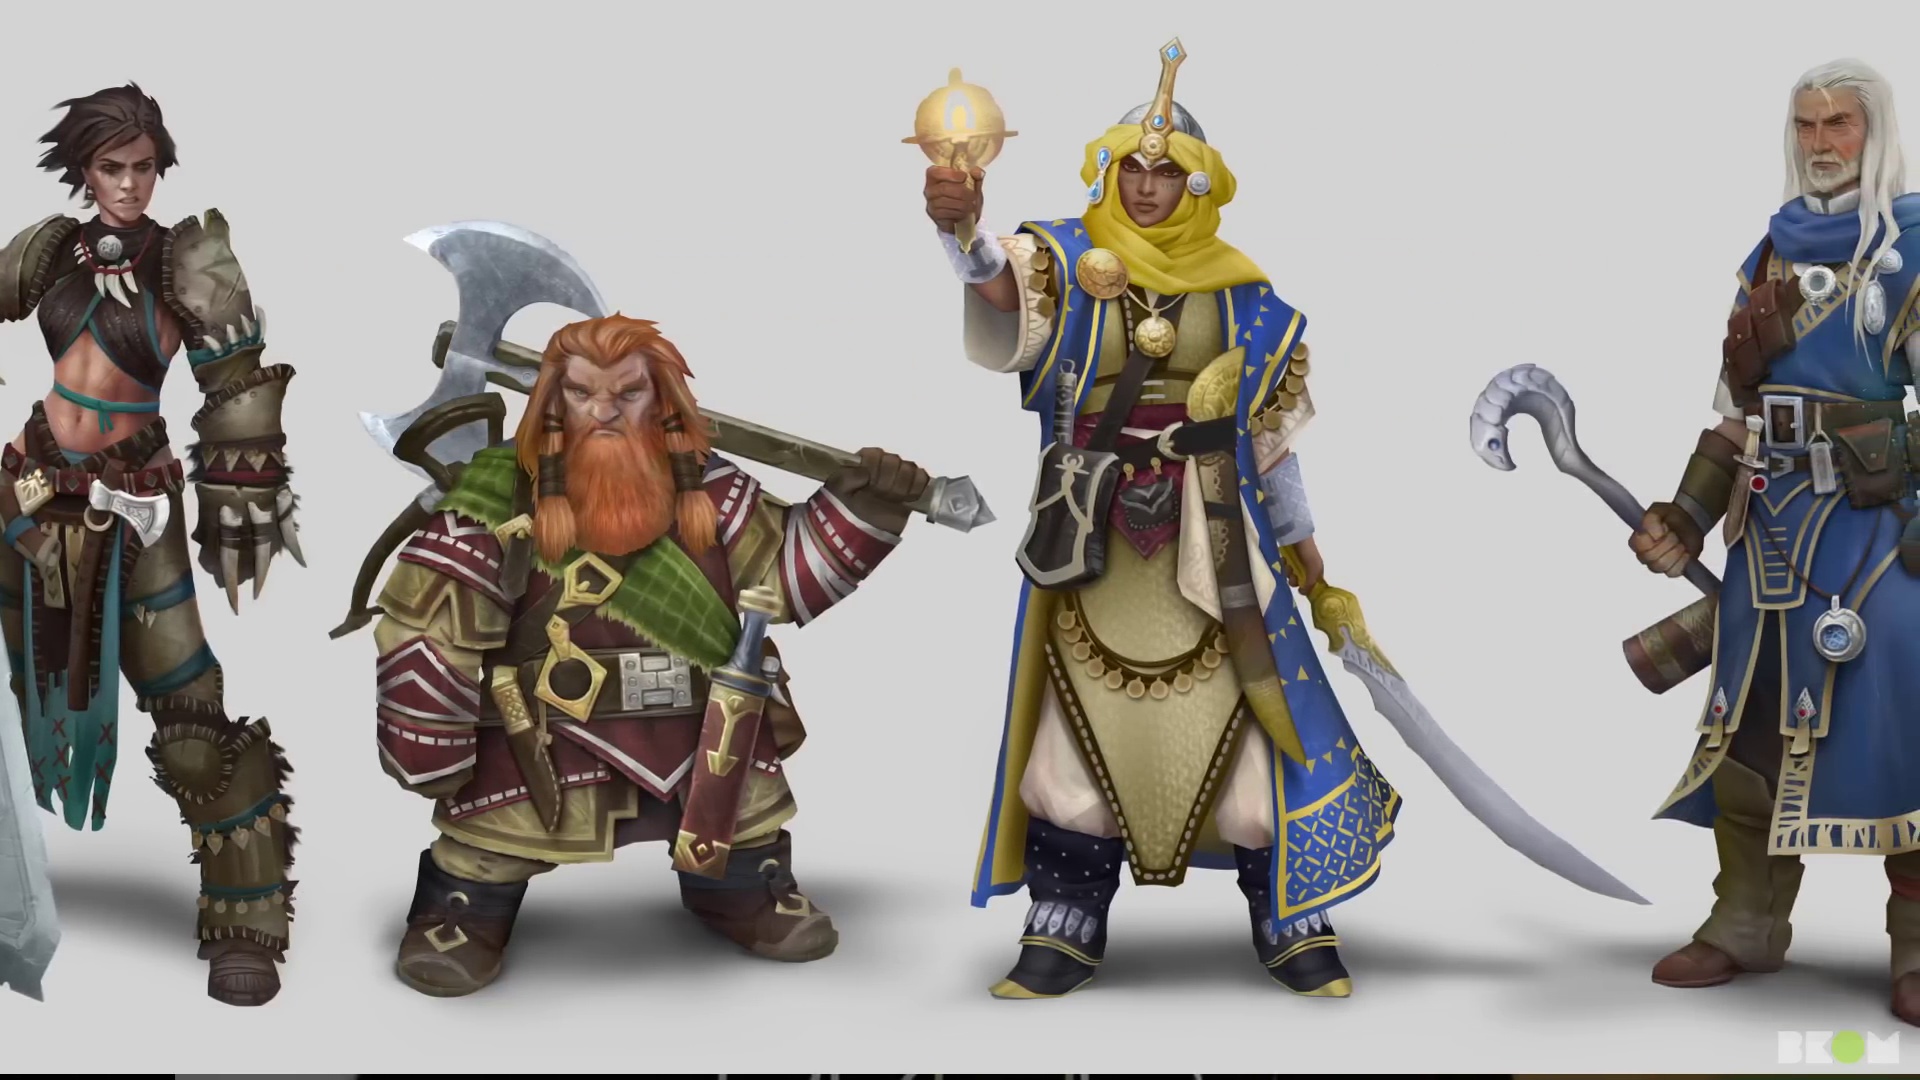 (Four classes are known so far, one of them is a heroine from Pathfinder: Kingmaker.)